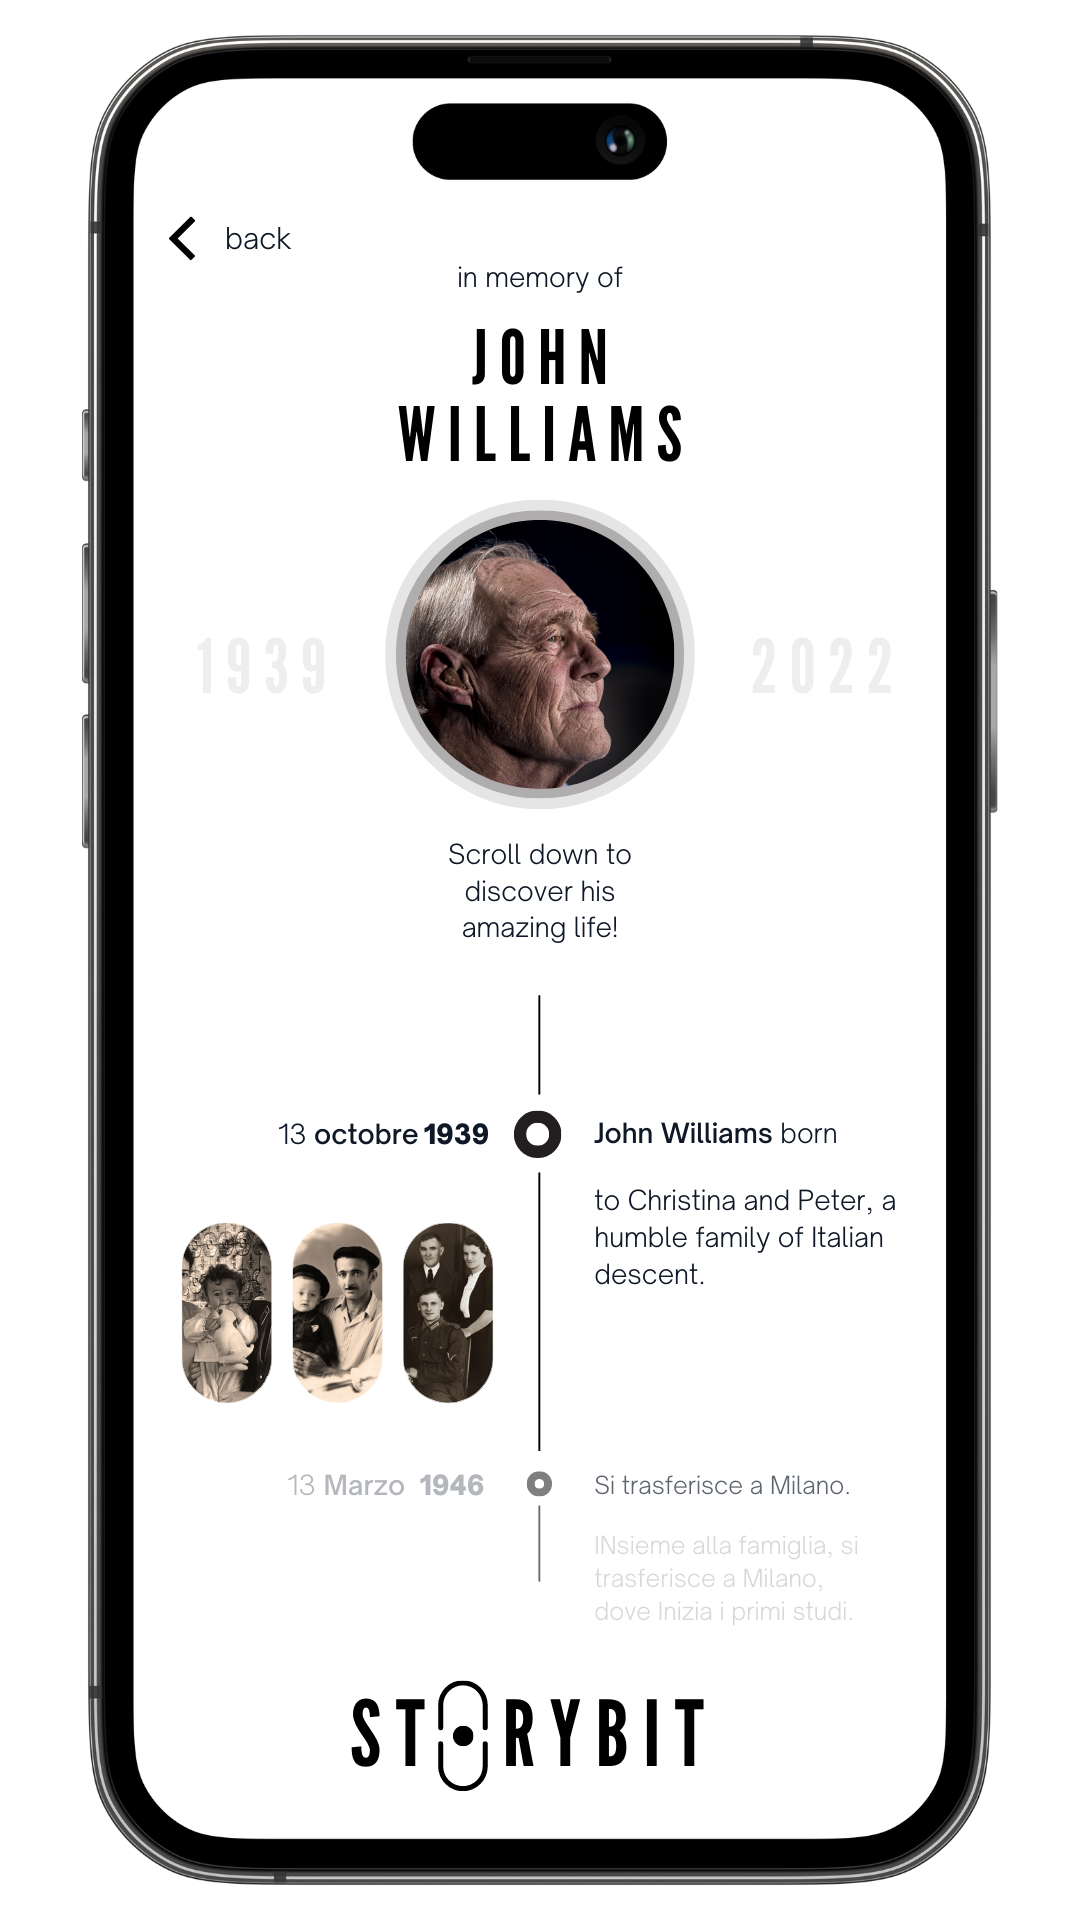 The first app created to remind us of people who are no longer with us.